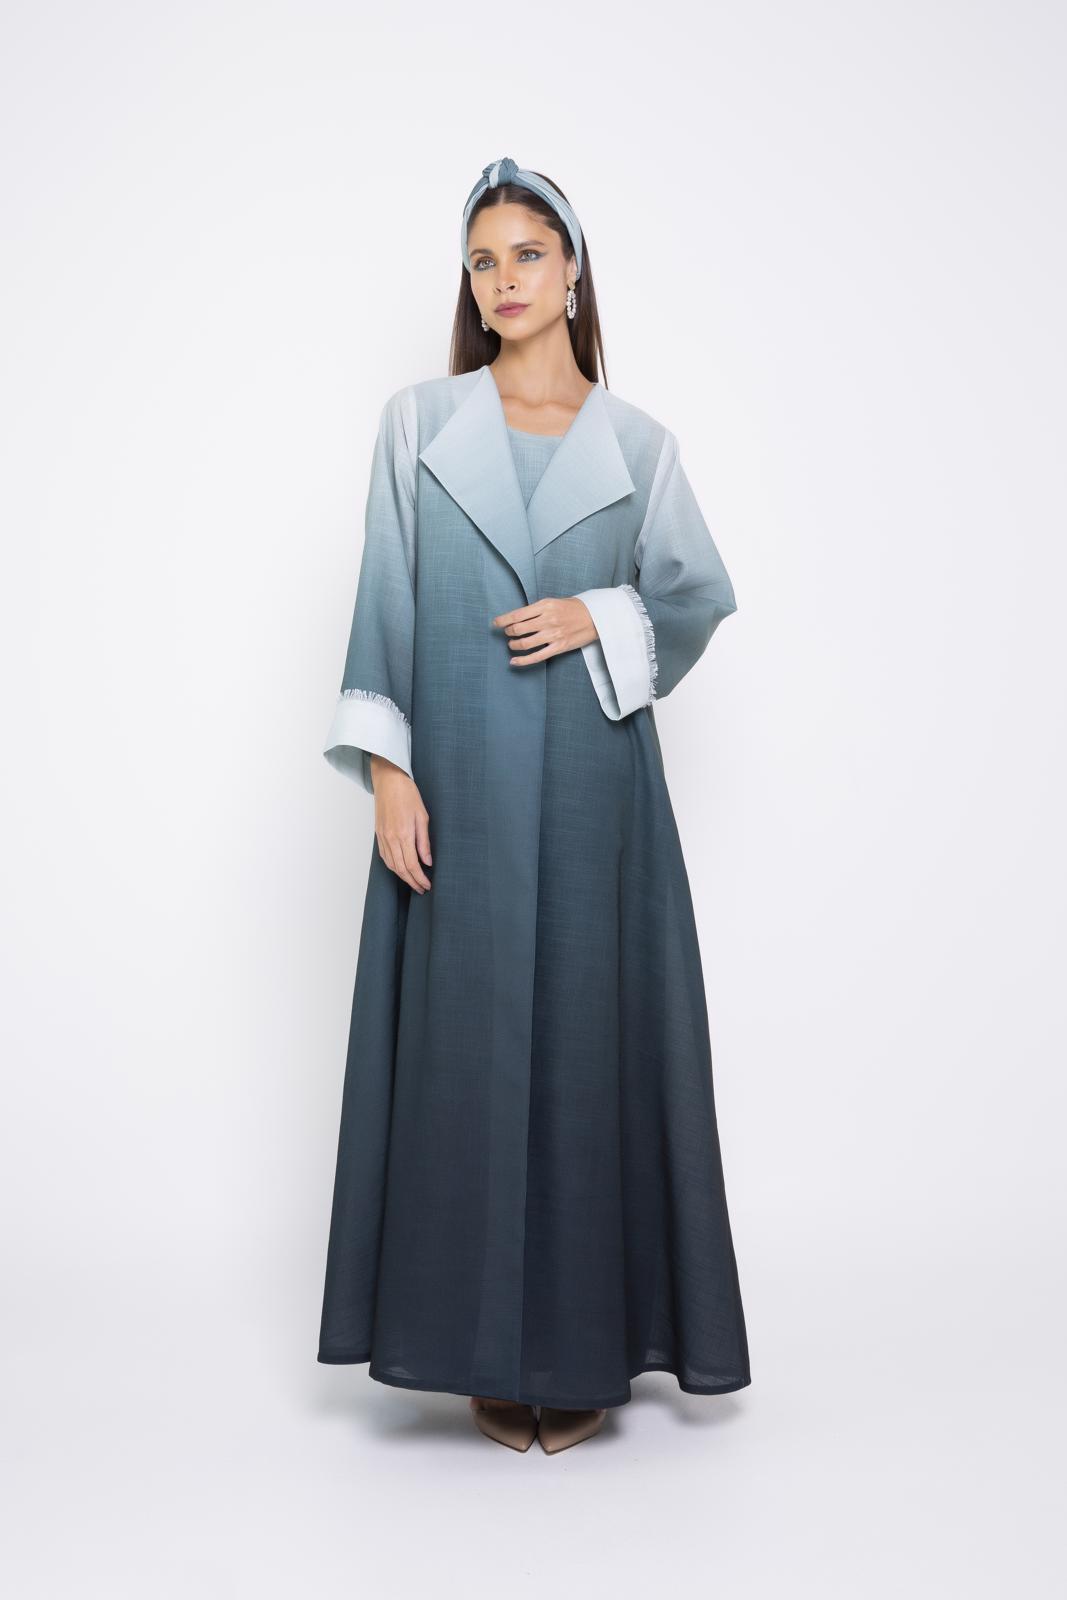 Ombré linen abaya with wide classic collar